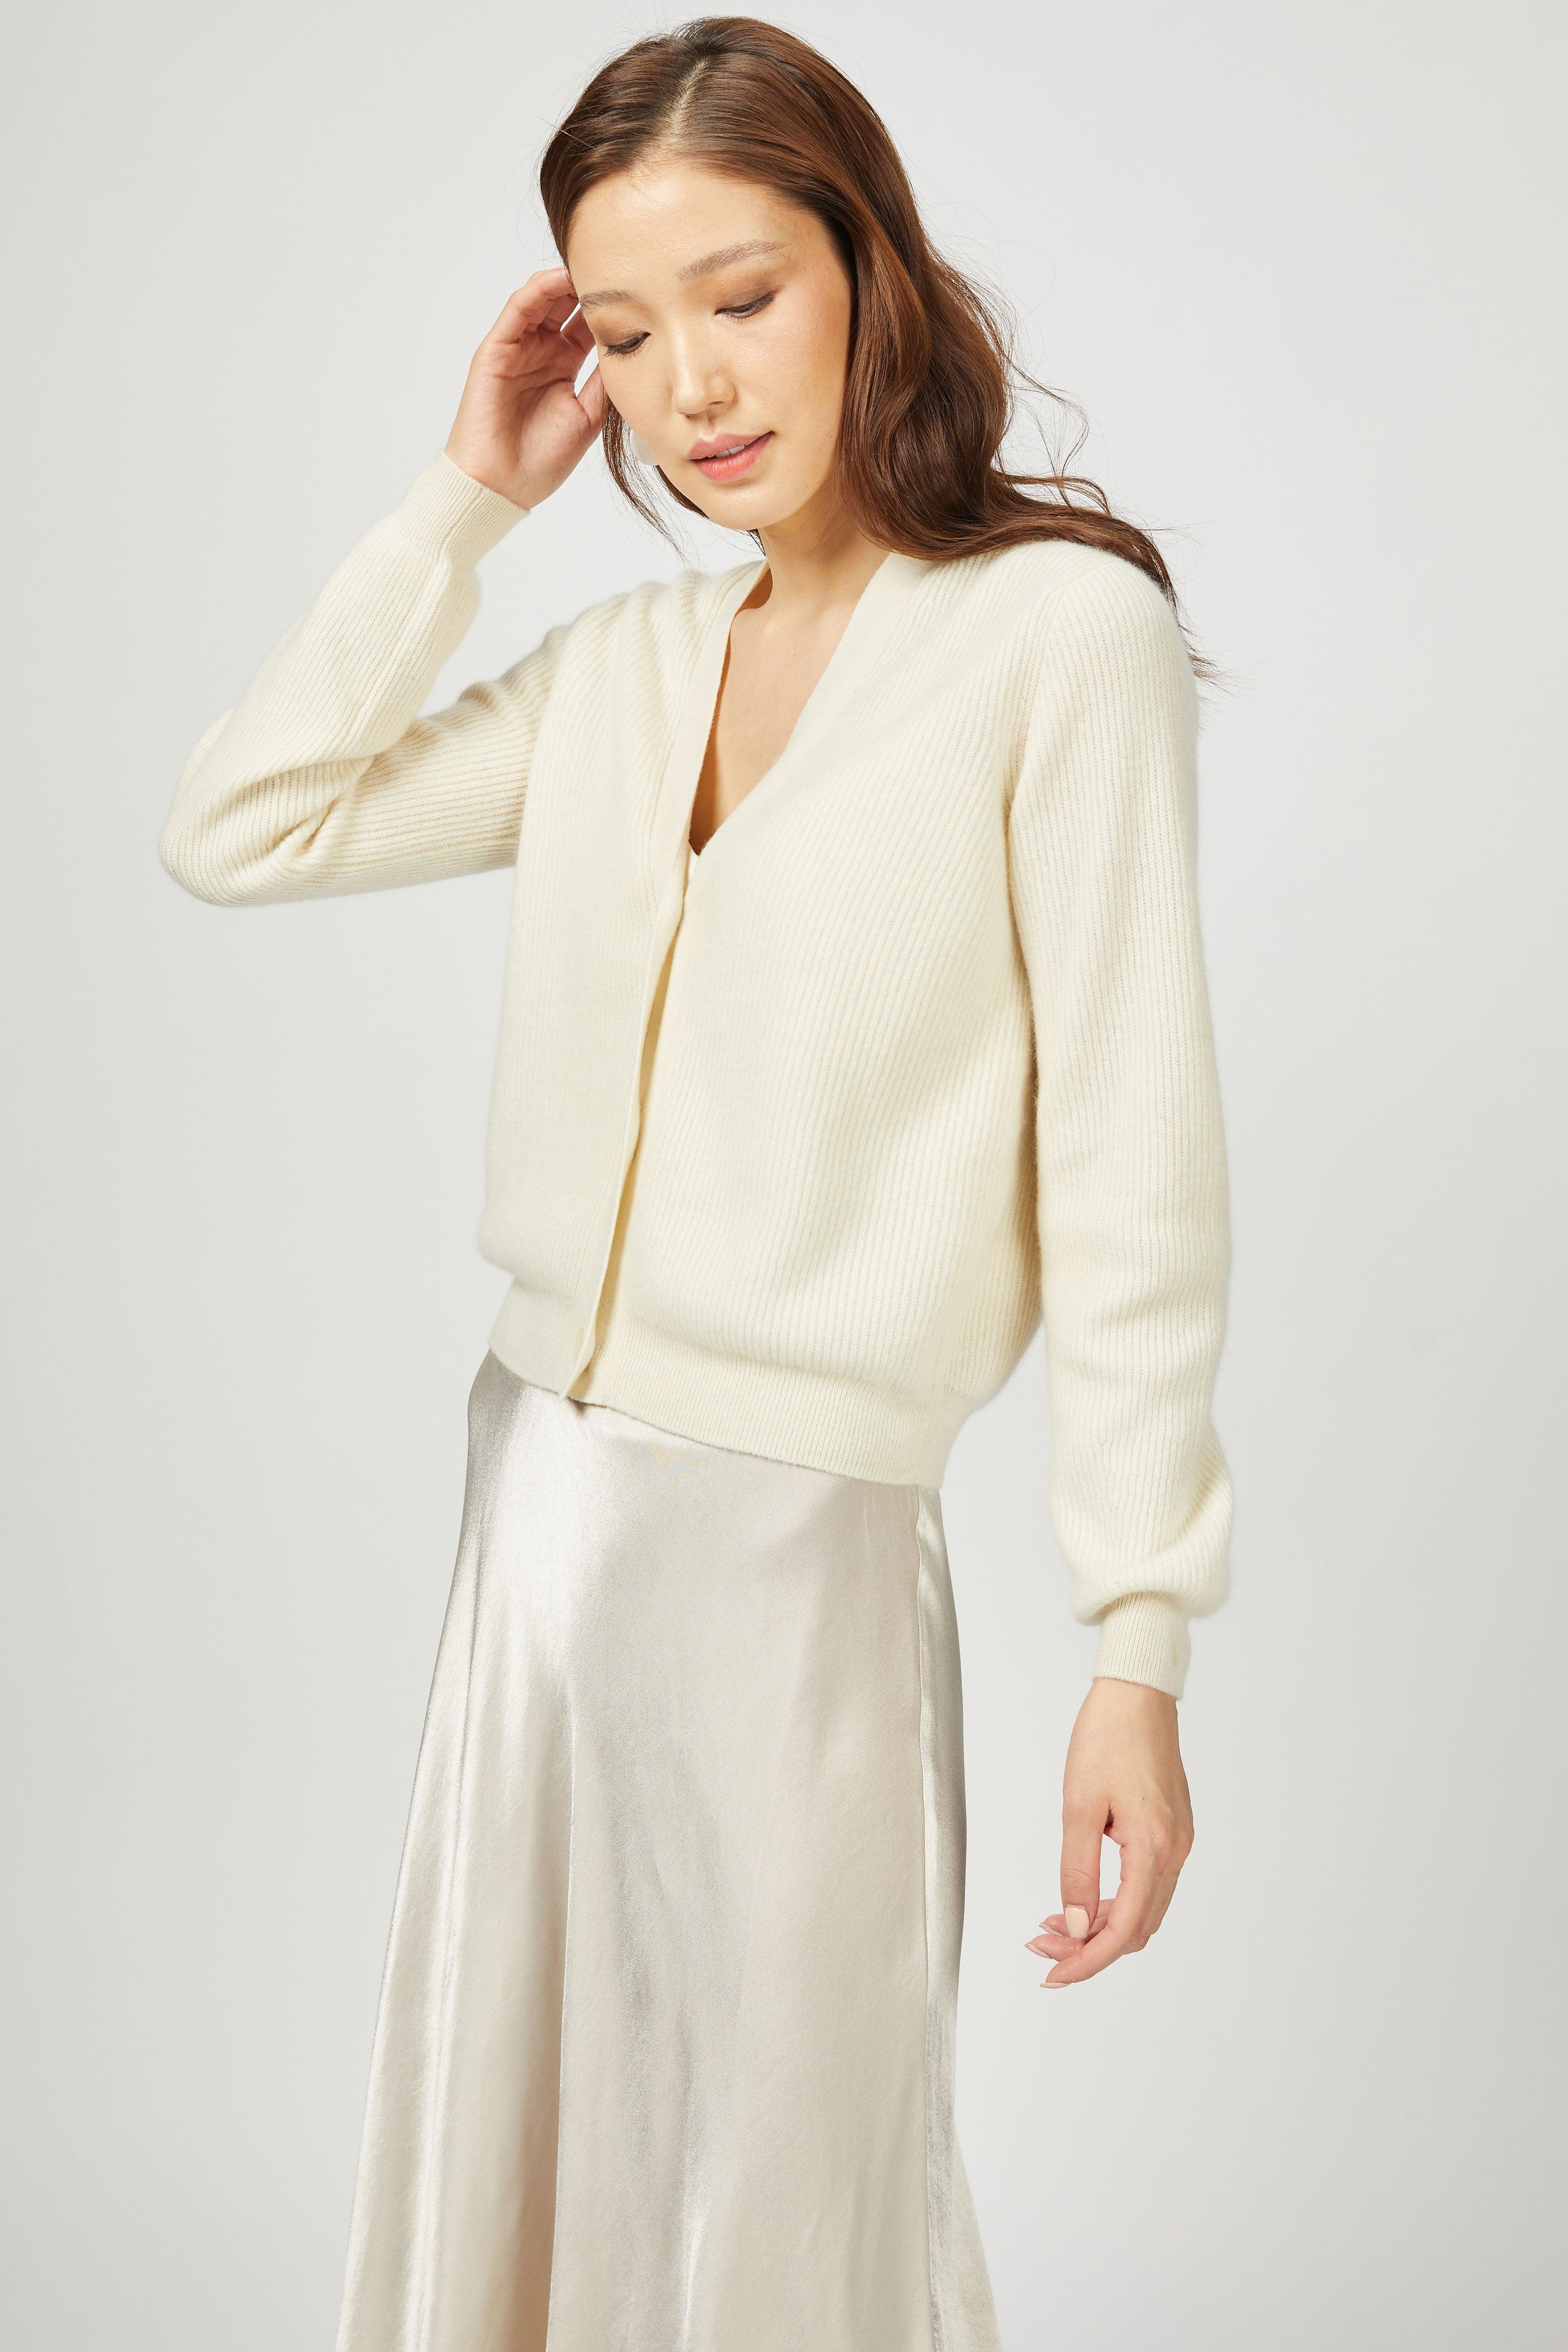 Gobi Cashmere Cashmere Chunky Summer Cardigan in White - Lyst